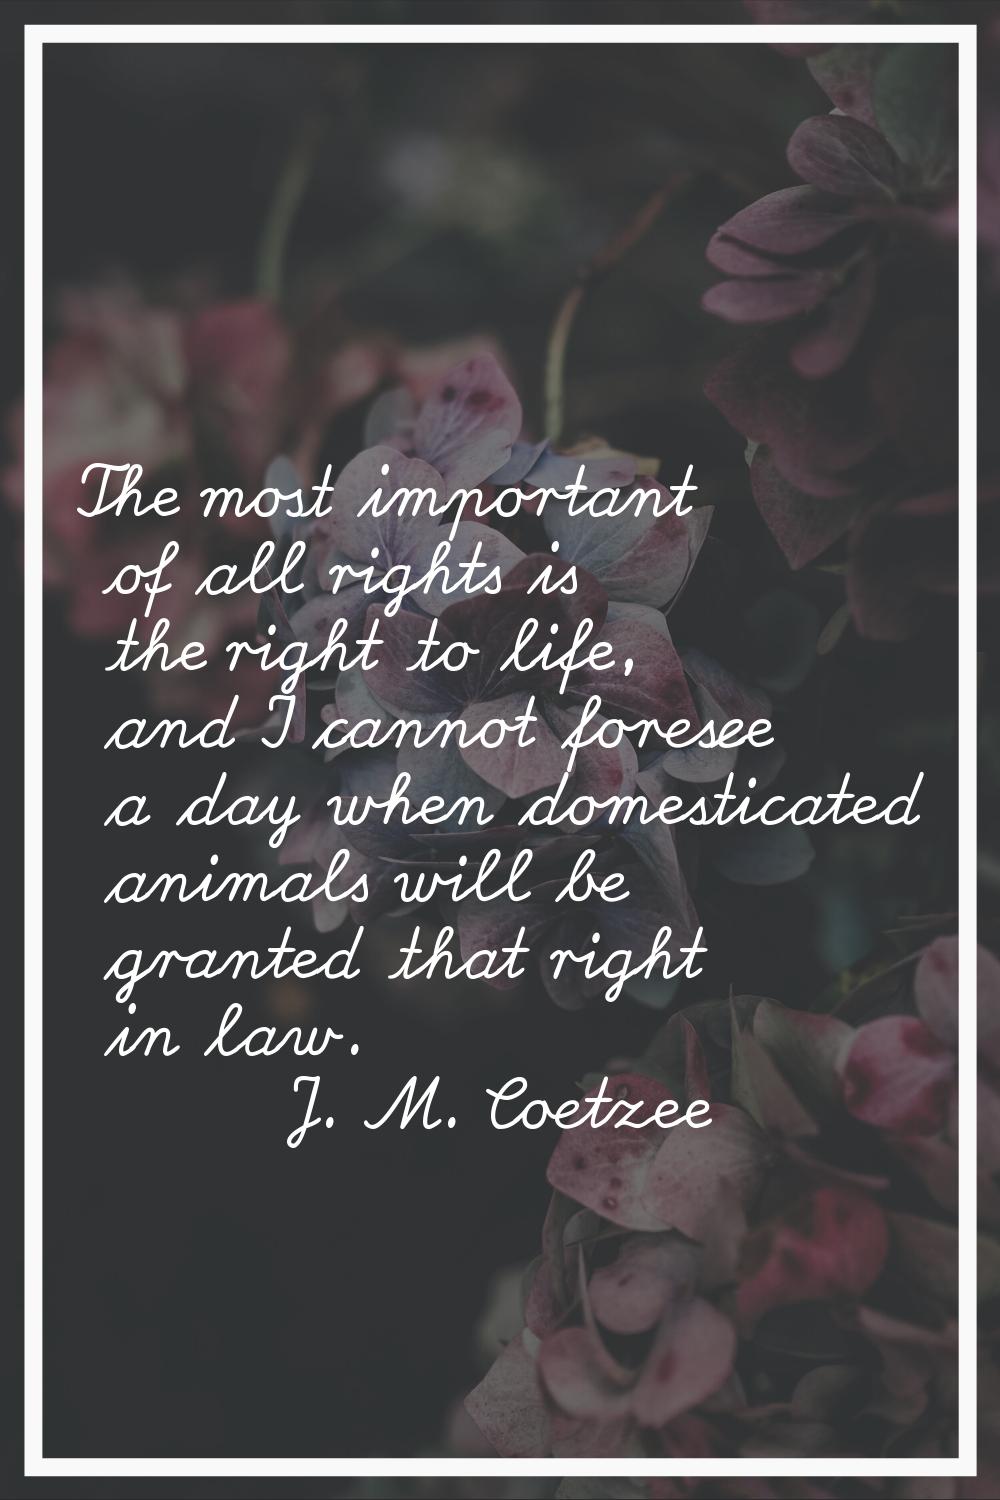 The most important of all rights is the right to life, and I cannot foresee a day when domesticated